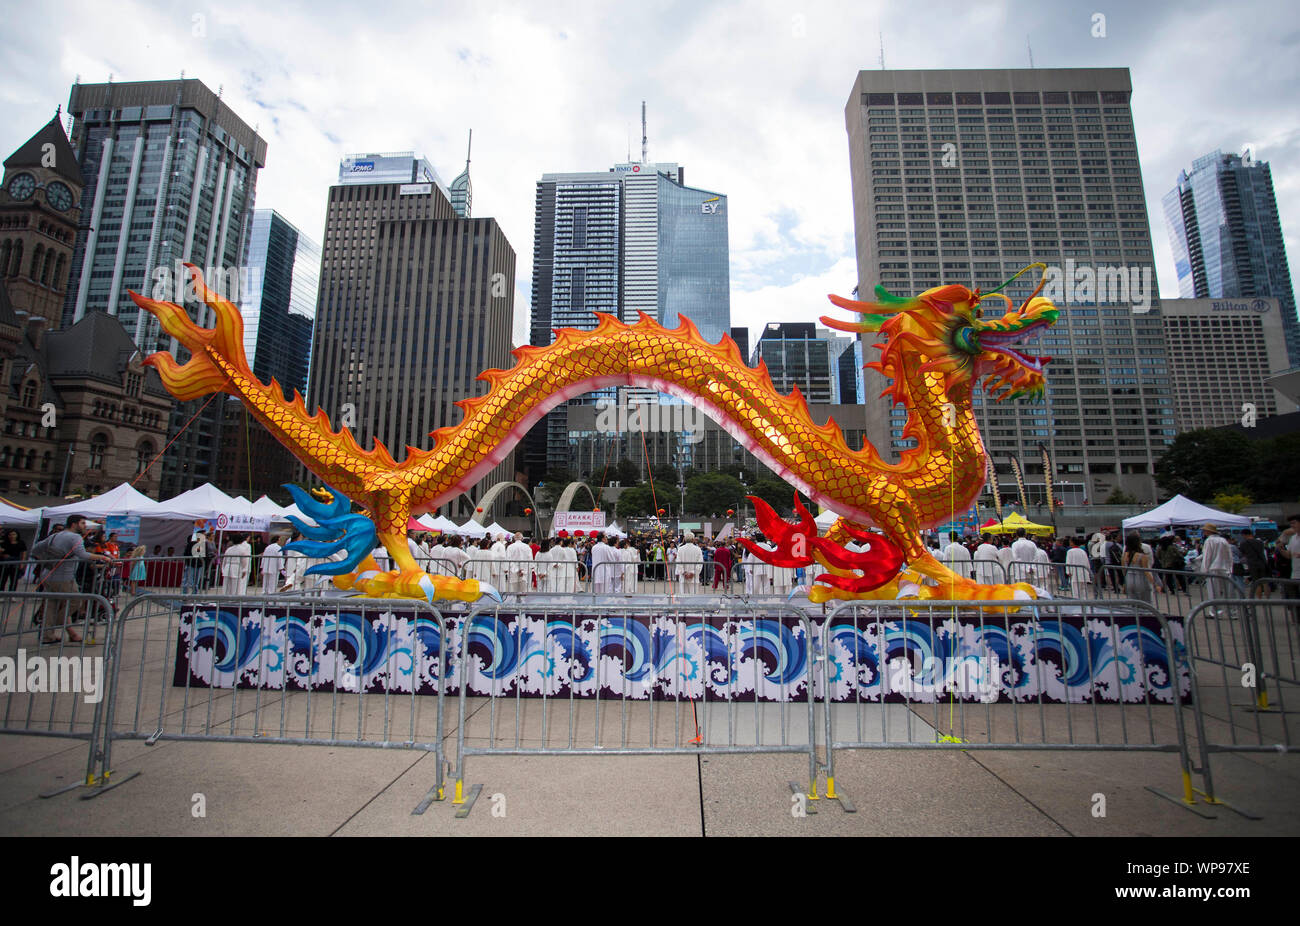 Toronto, Canada. 7th Sep, 2019. A giant-sized inflatable Chinese dragon is seen during the Toronto Dragon Festival 2019 at the Nathan Phillips Square in Toronto, Canada, Sept. 7, 2019. The Toronto Dragon Festival 2019, which kicked off Friday at the Nathan Phillips Square in front of the Toronto City Hall, is catching the eyes of thousands of tourists and local residents. Partially funded and supported by the Government of Canada, the three-day 2019 Toronto Dragon Festival is hosted by the Canadian Association of Chinese Performing Arts. Credit: Zou Zheng/Xinhua Stock Photo